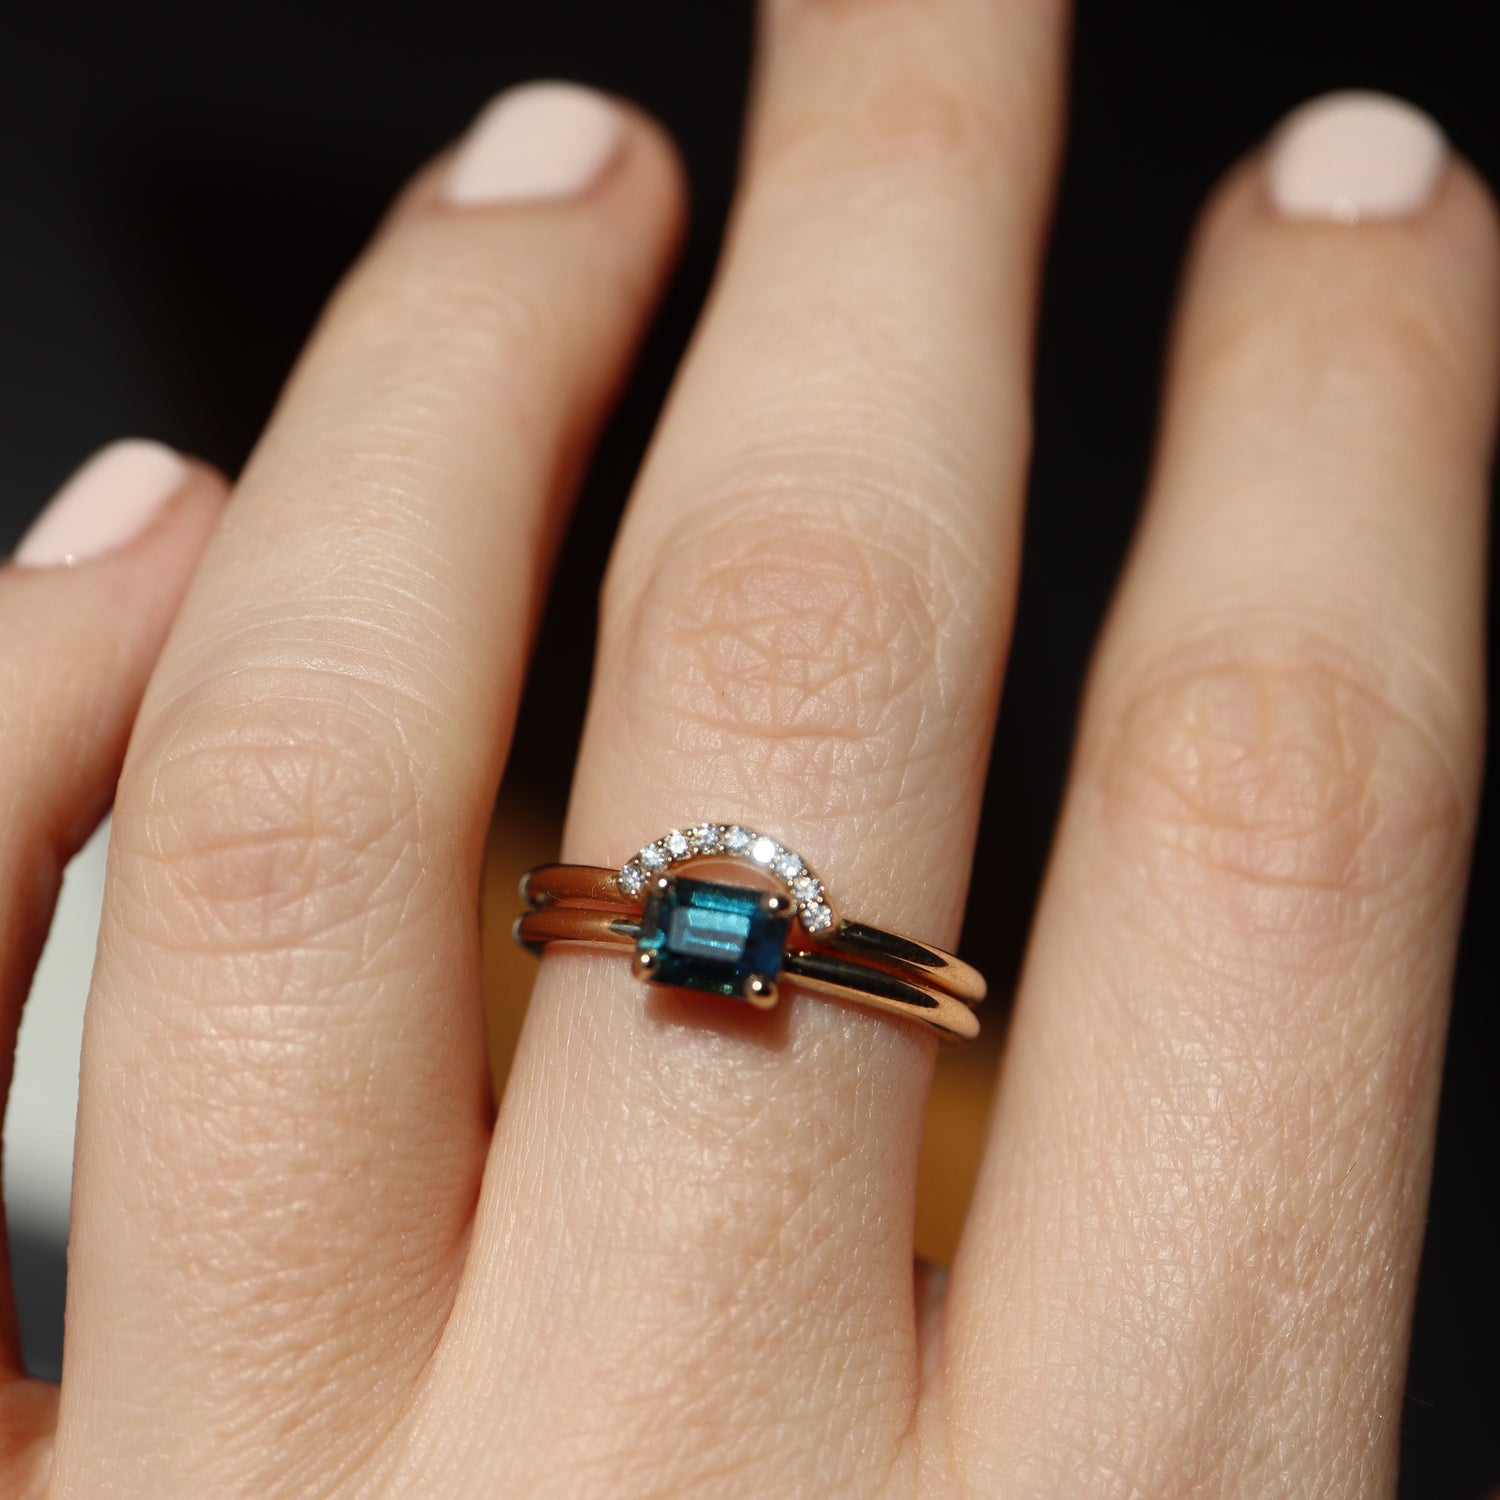 Arch Ring with the Suze Ring, Wedding rings set, 14k yellow gold, deep teal sapphire, 9 stone diamond contour band